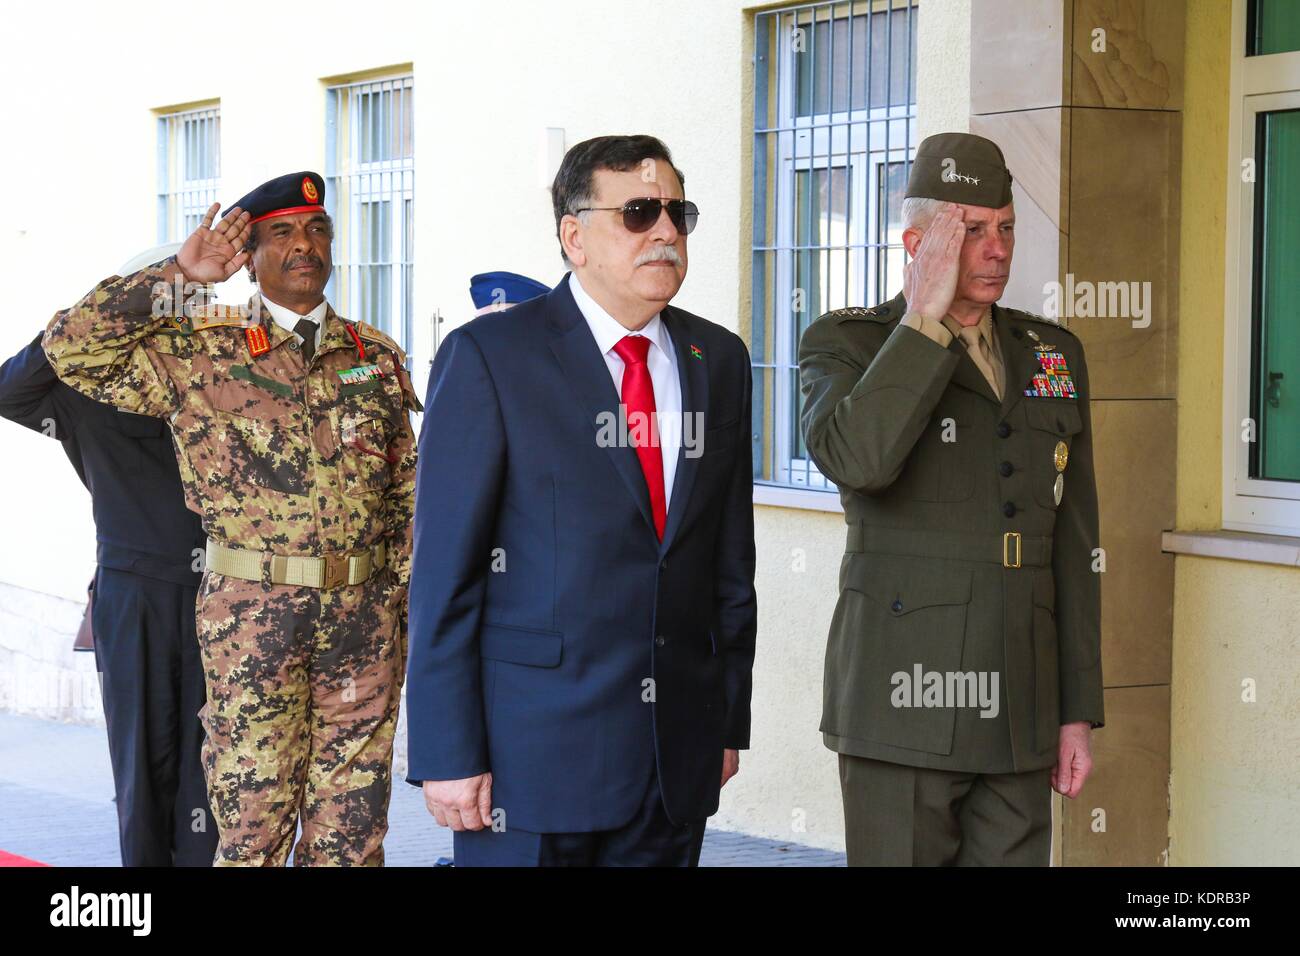 Libyan Prime Minister Fayez al-Sarraj (left) and U.S Marine Corps Africa Command Commander Thomas Waldhauser render honors before a meeting at the U.S. Africa Command Headquarters April 5, 2017 in Stuttgart, Germany. Stock Photo